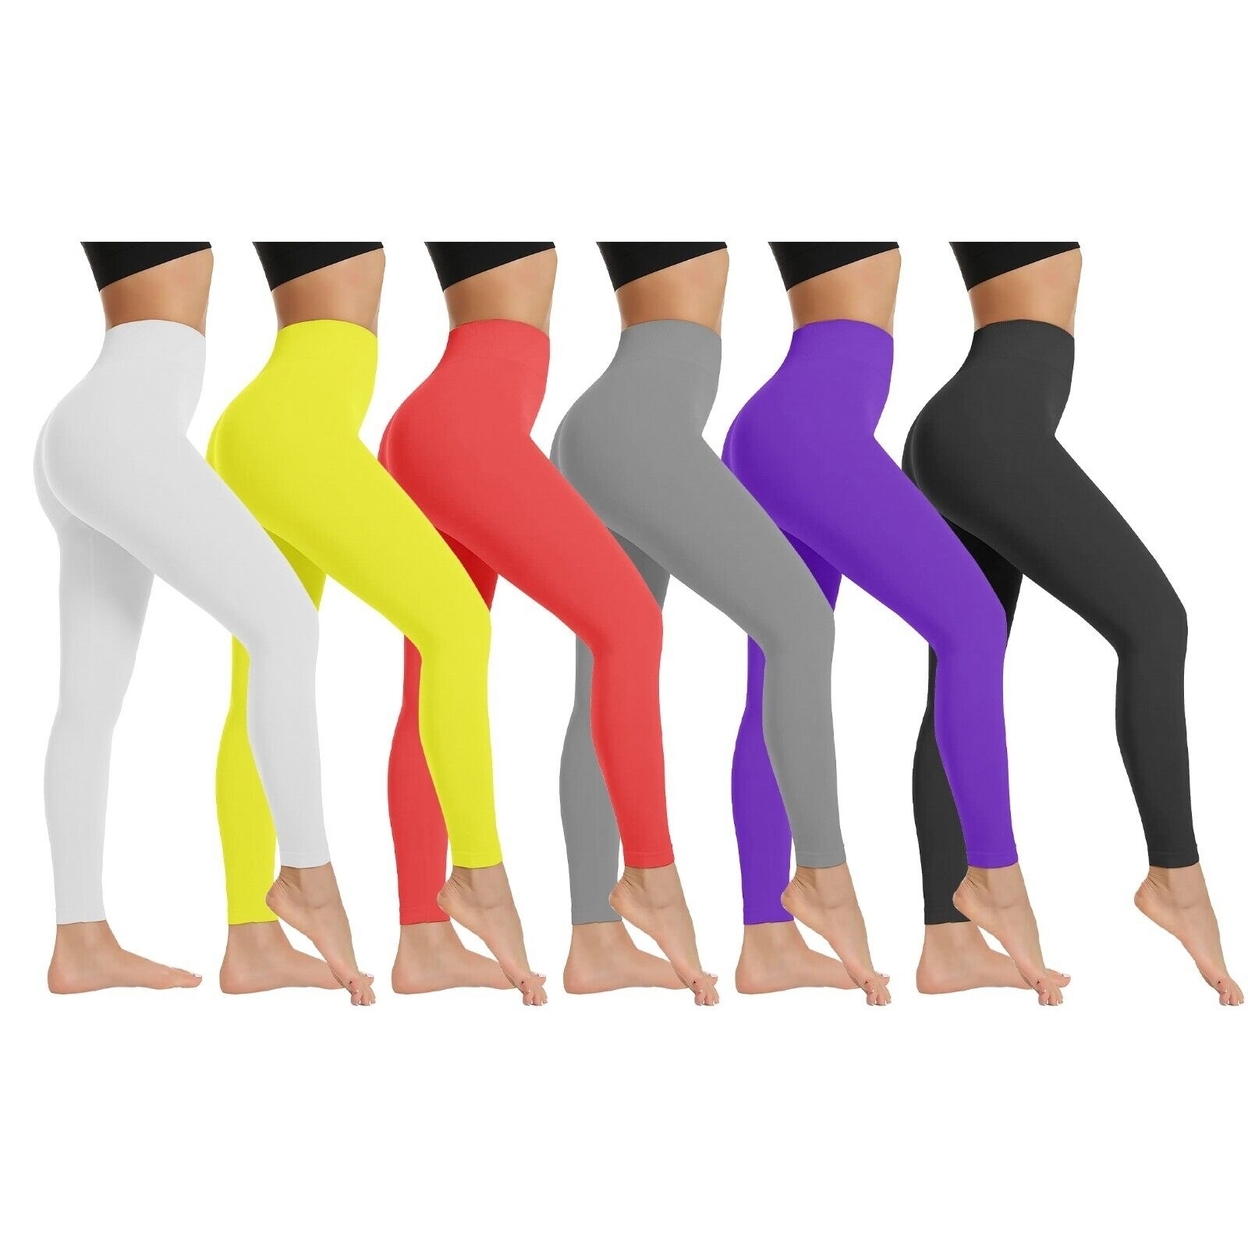 3-Pack: Women's High Waist Super Soft Active Athlete Stretch Yoga Cozy Leggings - Yellow,yellow,yellow,, Small